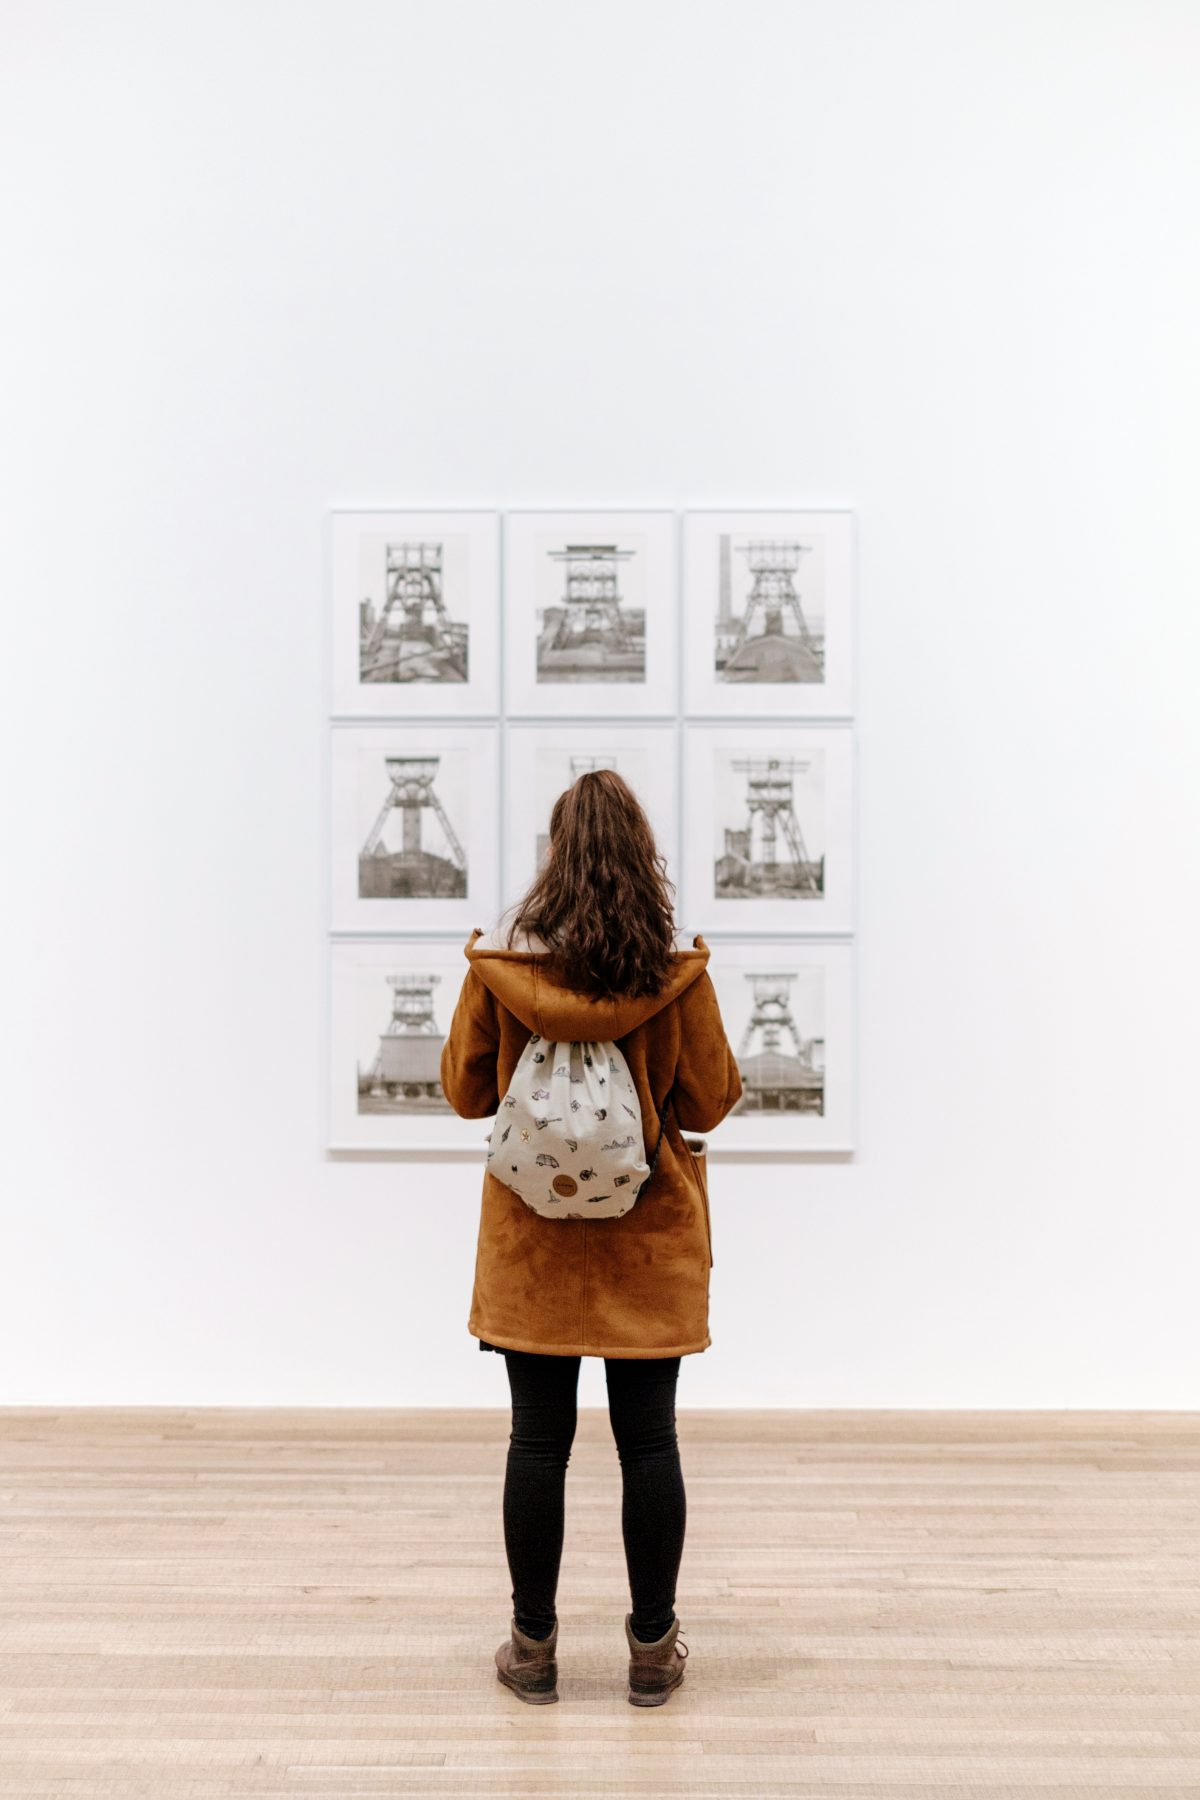 A woman wearing a brown hoodie admiring art pieces in front of her at the Cleveland Museum of Art